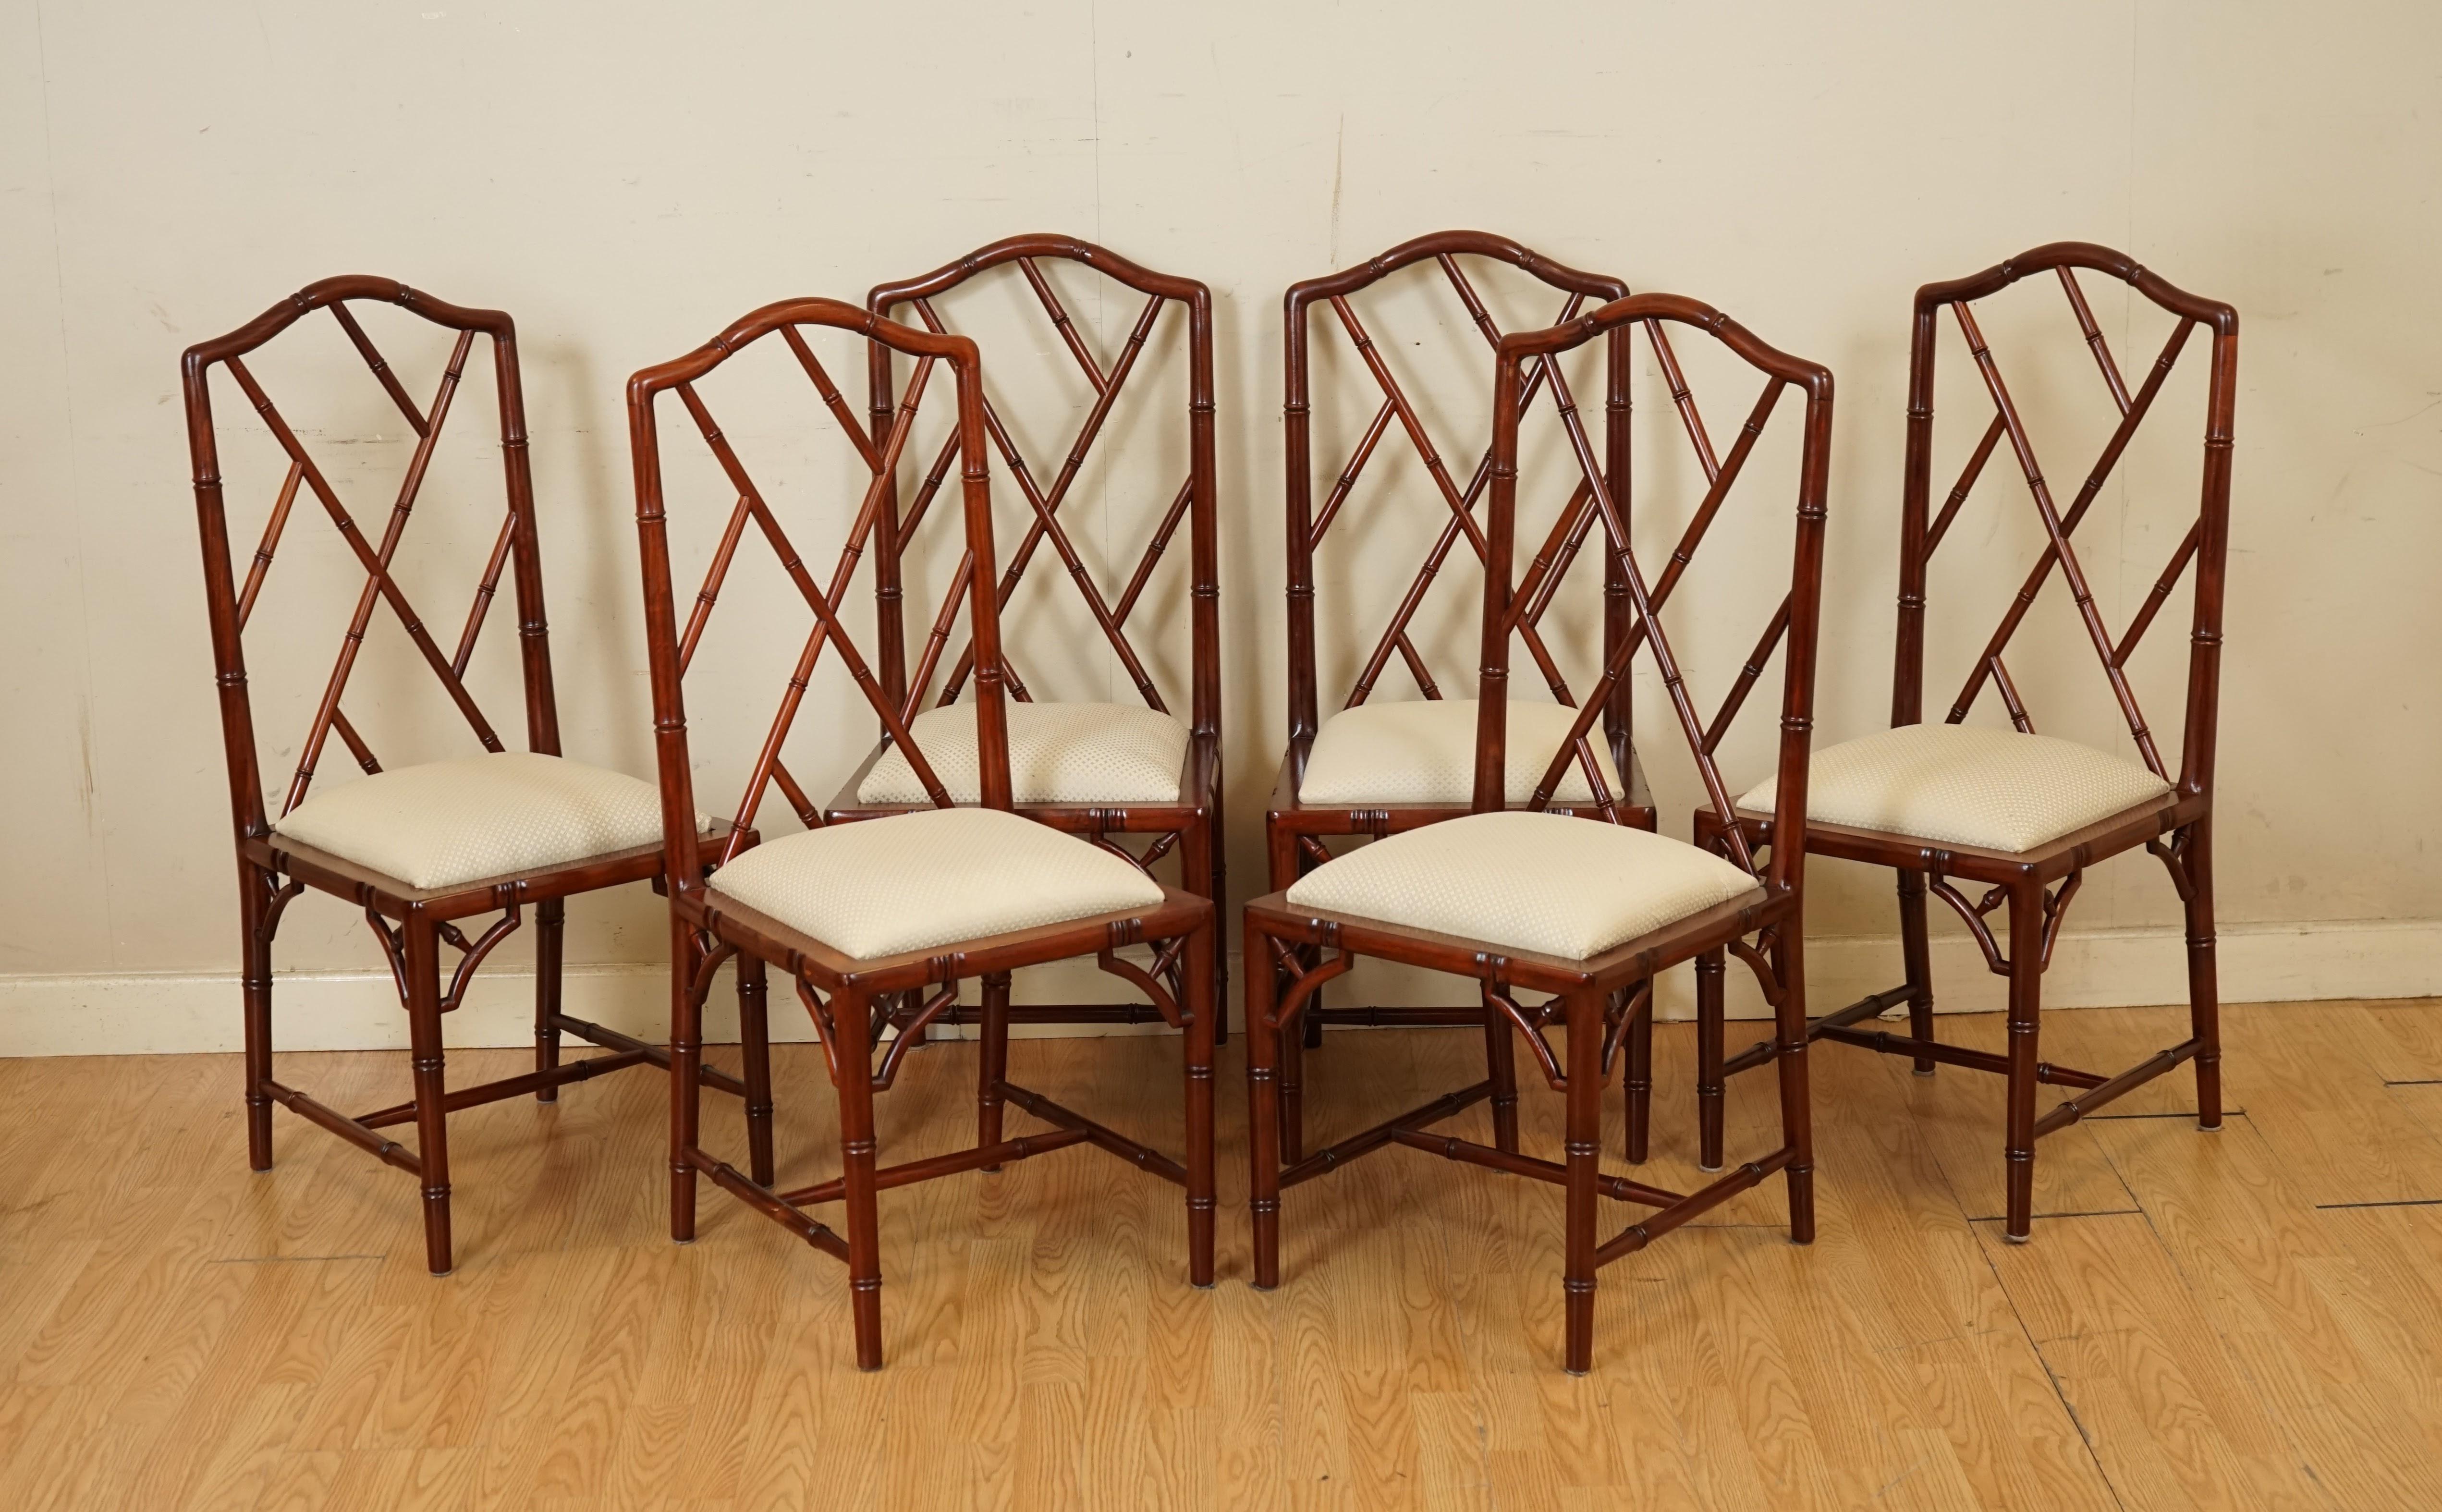 Hand-Crafted Very Stunning Set of 8 Vintage Bamboo Dinning Chairs with White Fabric Seating